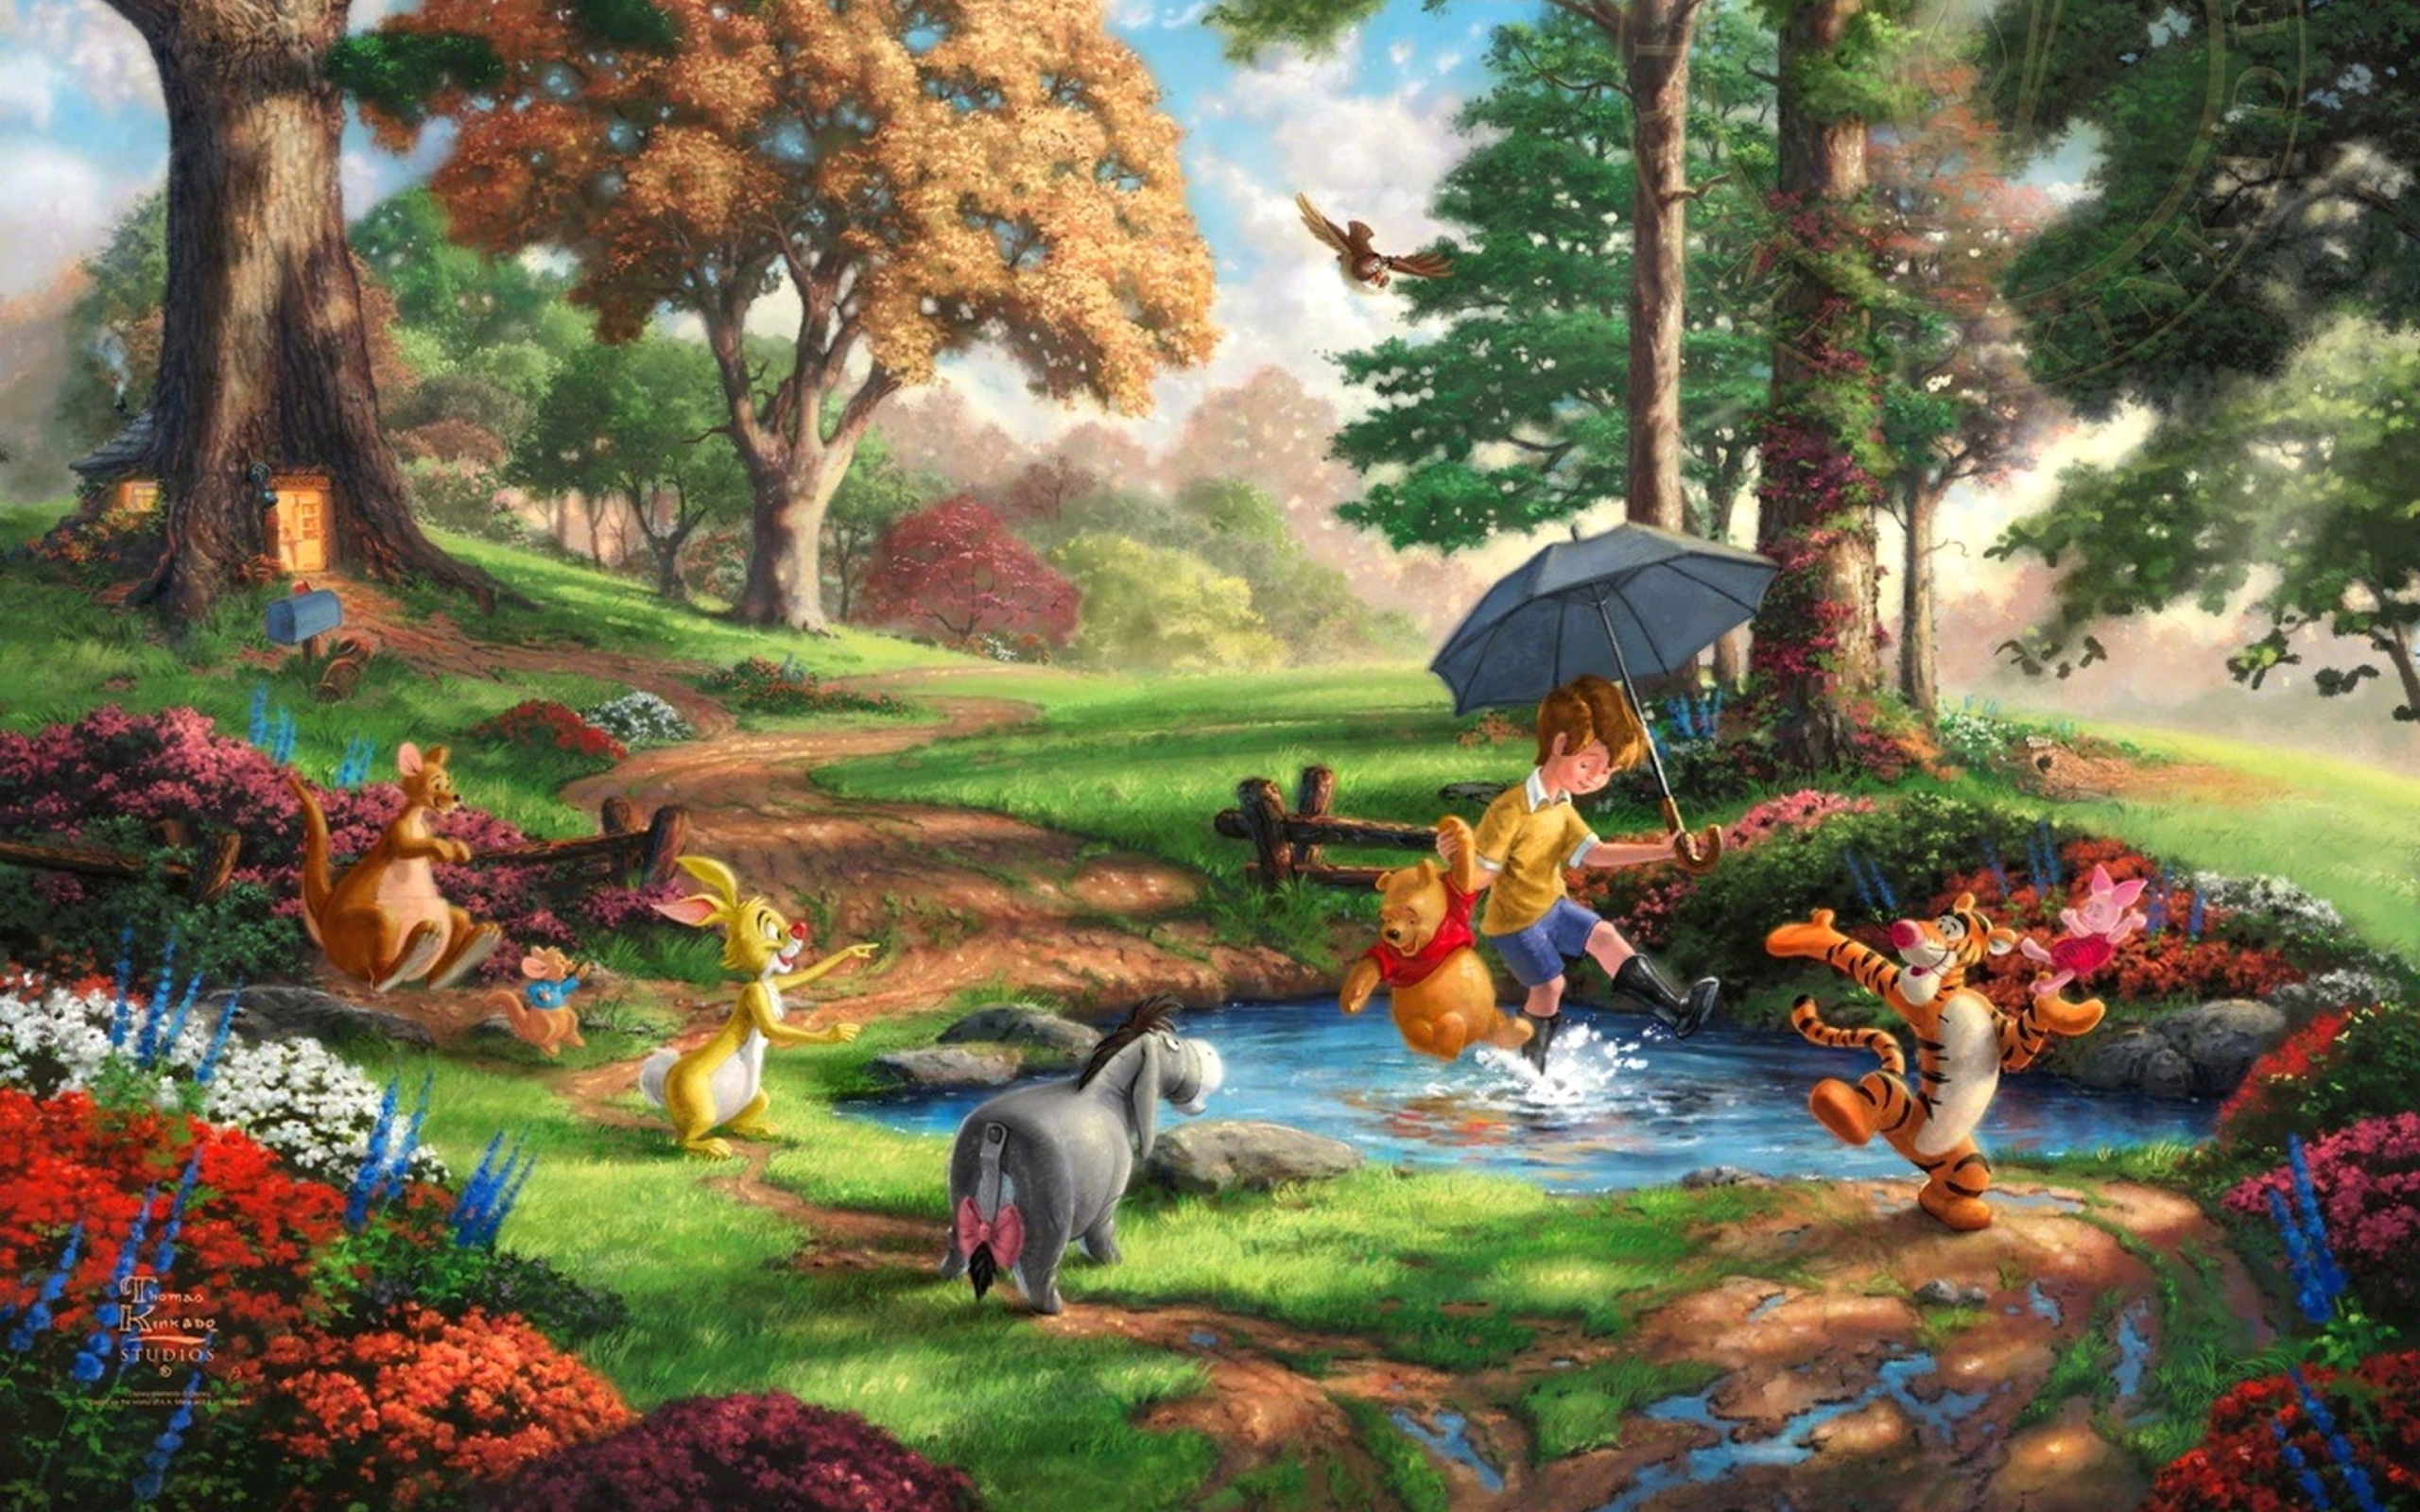 Winnie The Pooh And Friends wallpaper 2560x1600